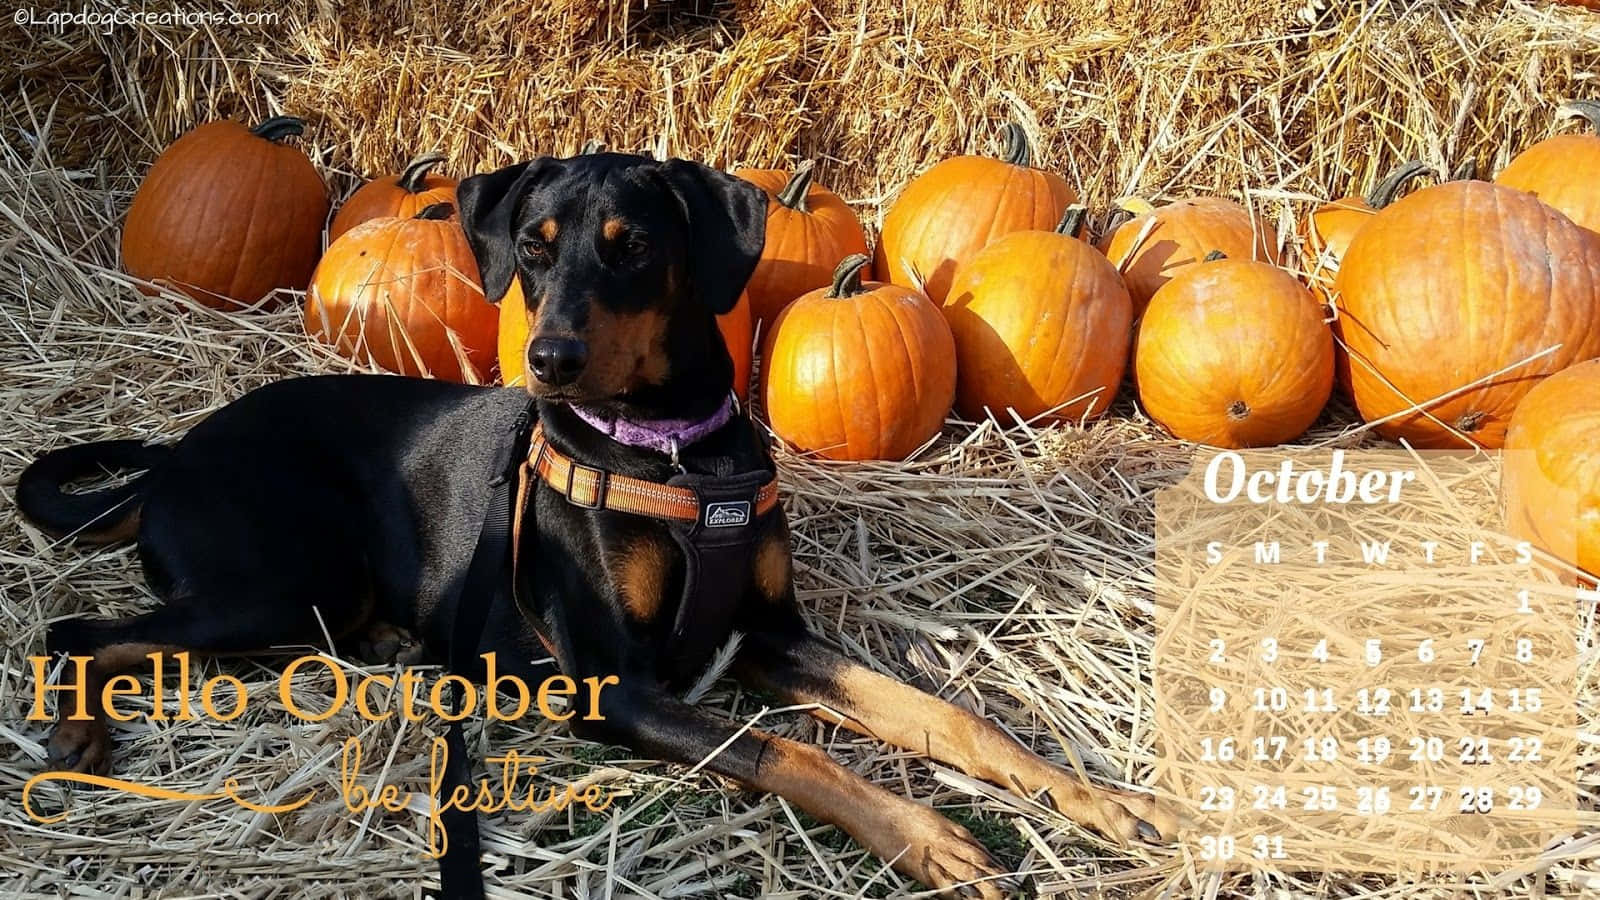 "Welcome to October with a Pumpkin" Wallpaper